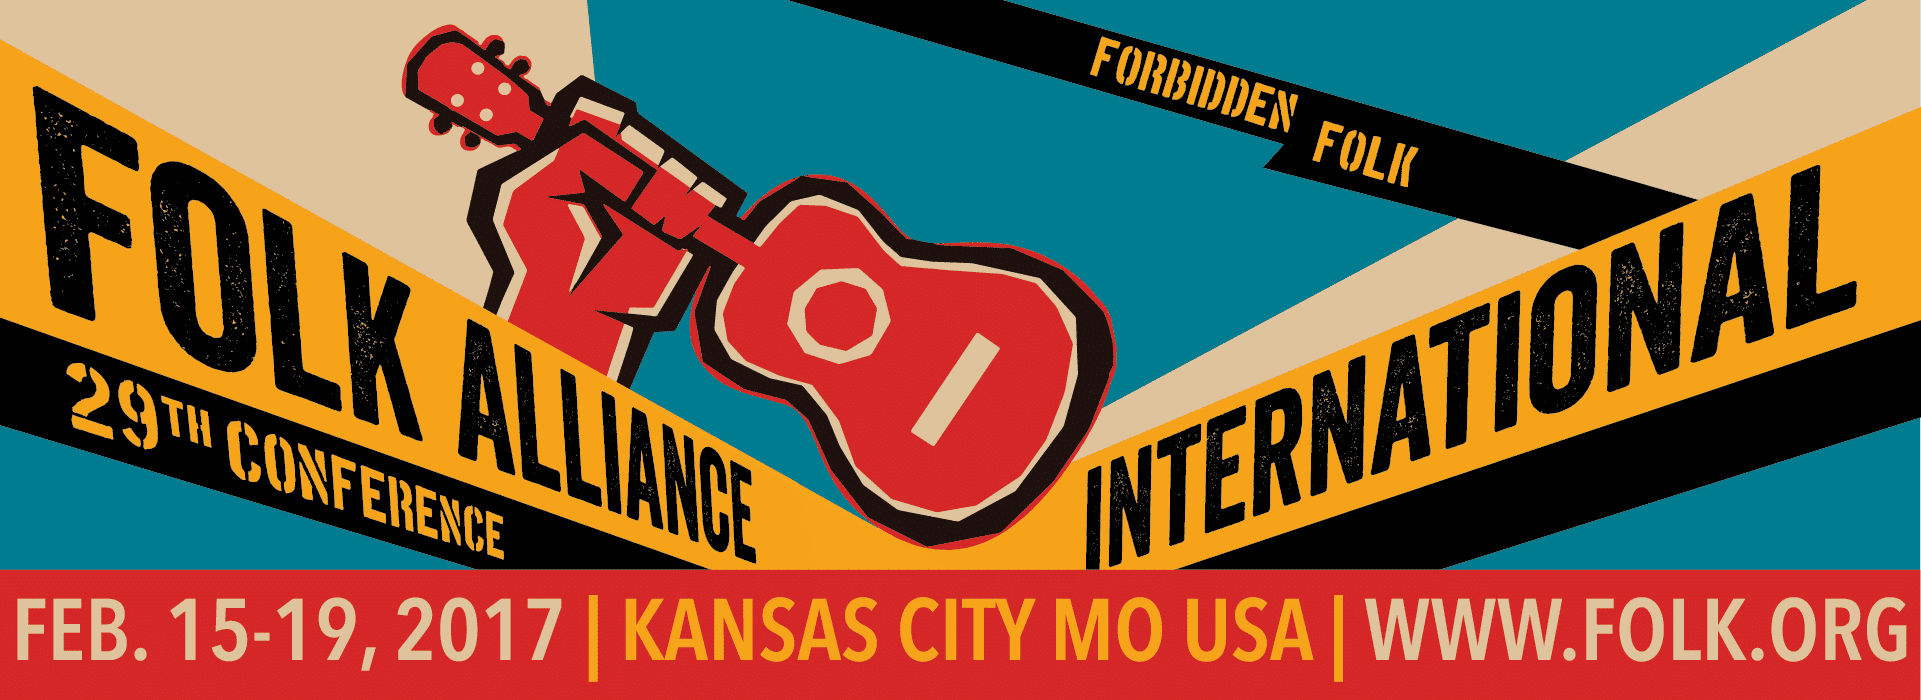 Five Things We’re Excited To See At Folk Alliance International Conference